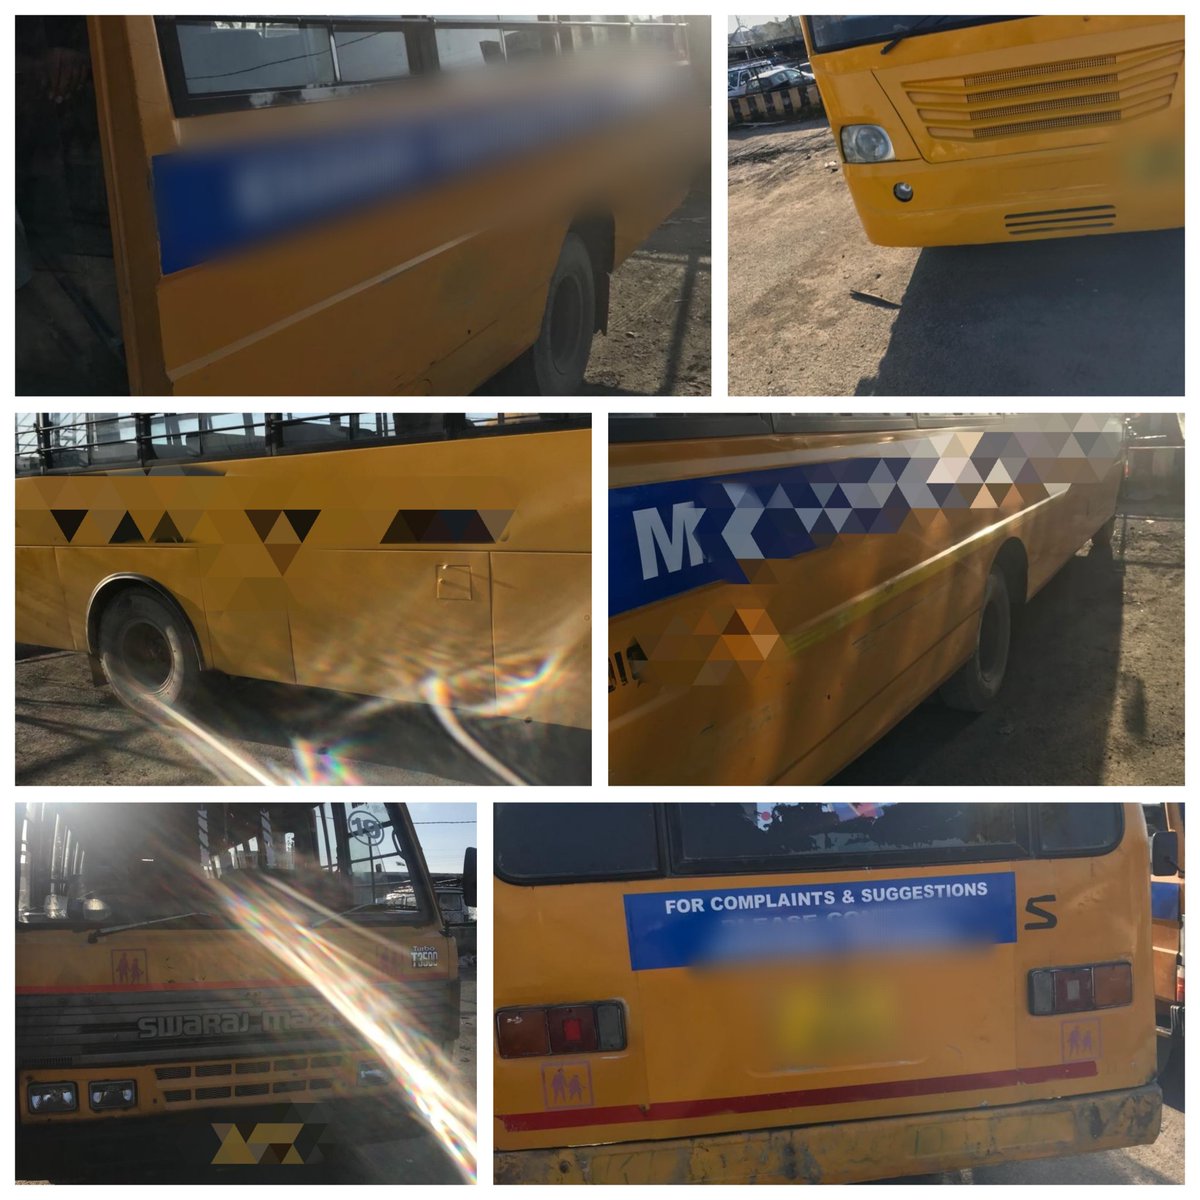 Traffic City Conducted Drive Against School And College Busses, Vehicles Found Violating Safety Norms And Without Proper Documents Were Seized. @Traffic_hqrs @igtraffic_jk @SrinagarPolice @muzaffar_a_shah @Tariq_wani786 @diprjk @GreaterKashmir @RJSameenKhan